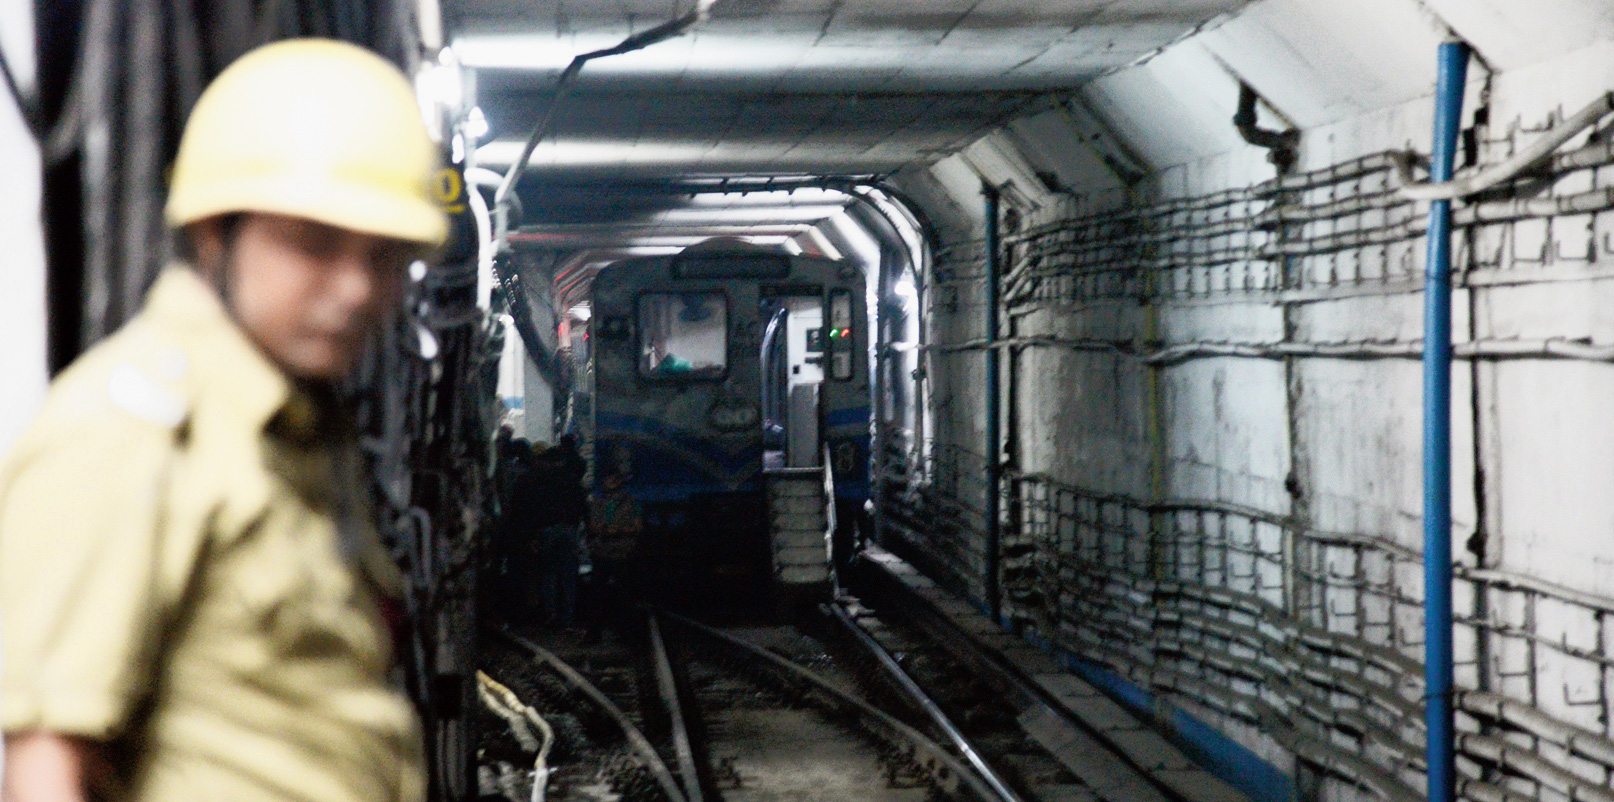 An air-conditioned Metro train stuck in the tunnel after it caught fire on December 27. The rake had been commissioned in 2010.